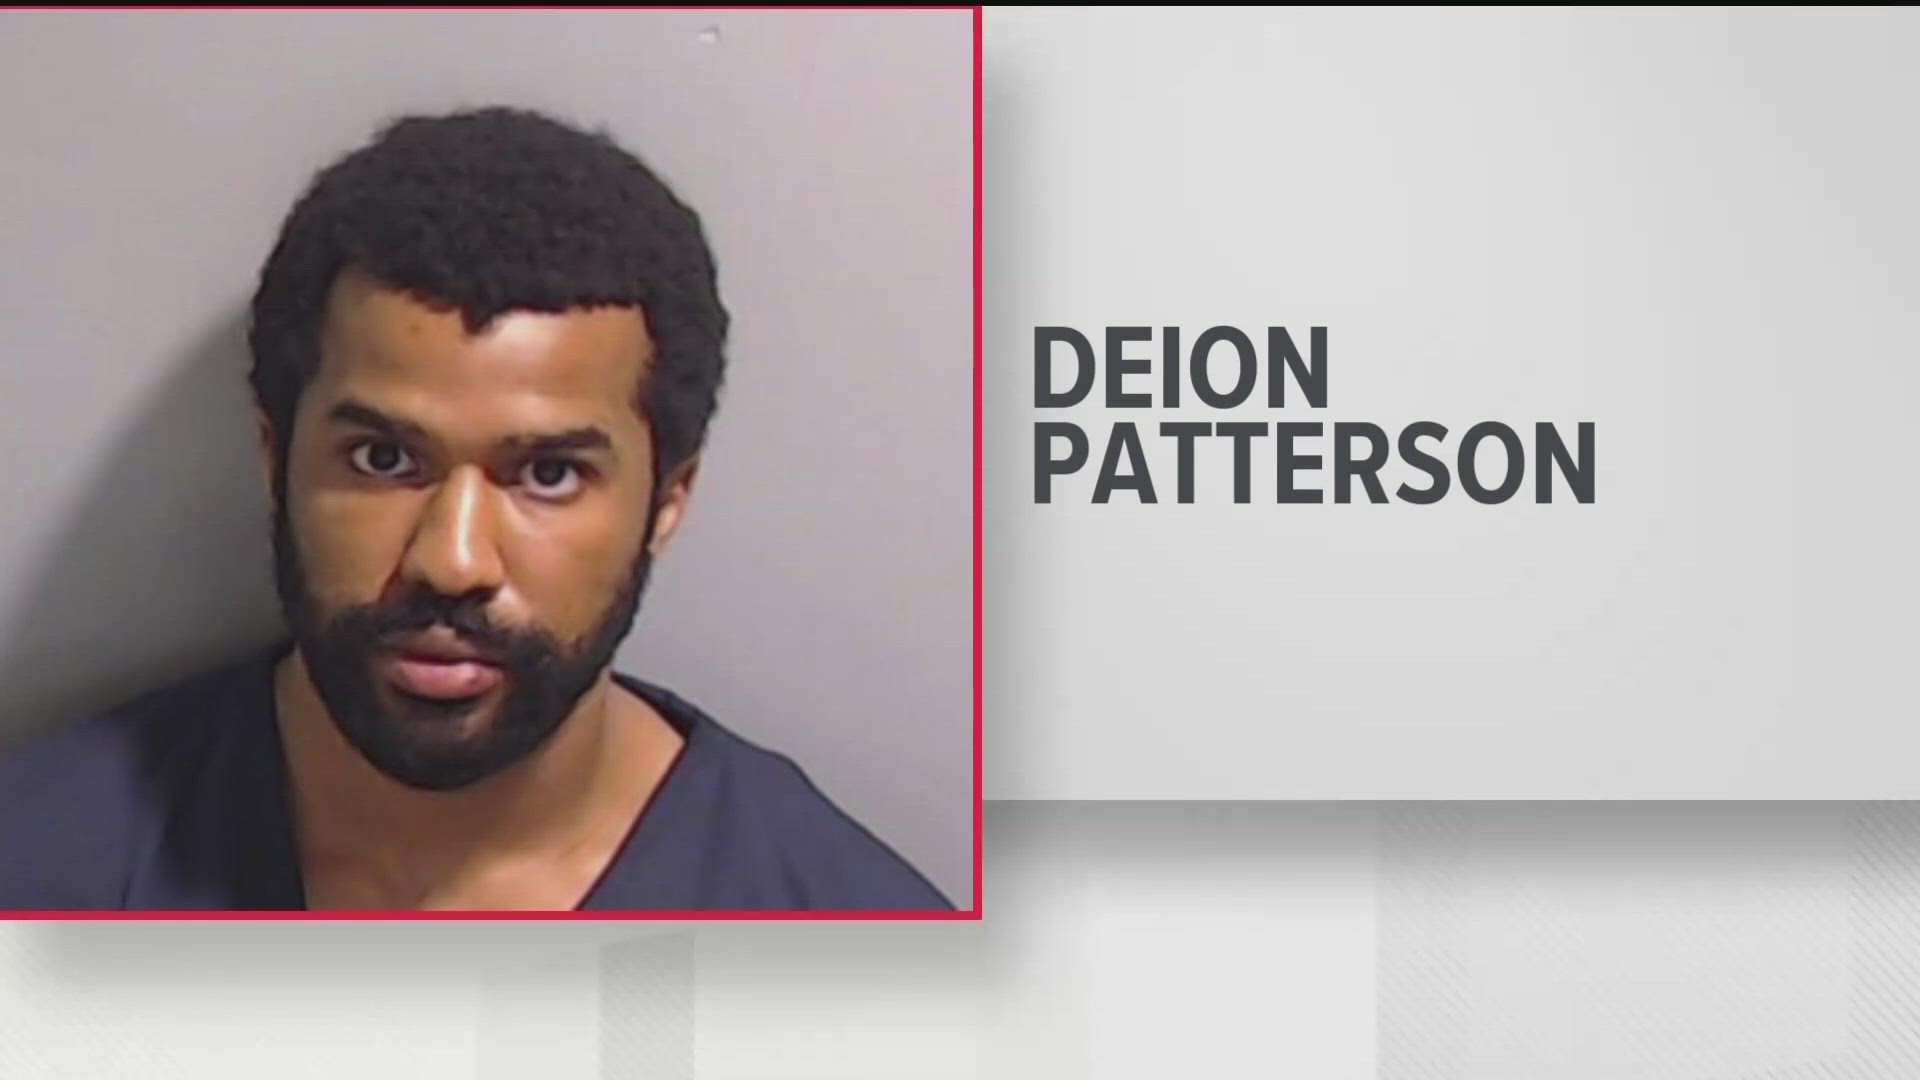 Deion Patterson, 24, faces 17 charges, according to documents from the Fulton County Superior Court.